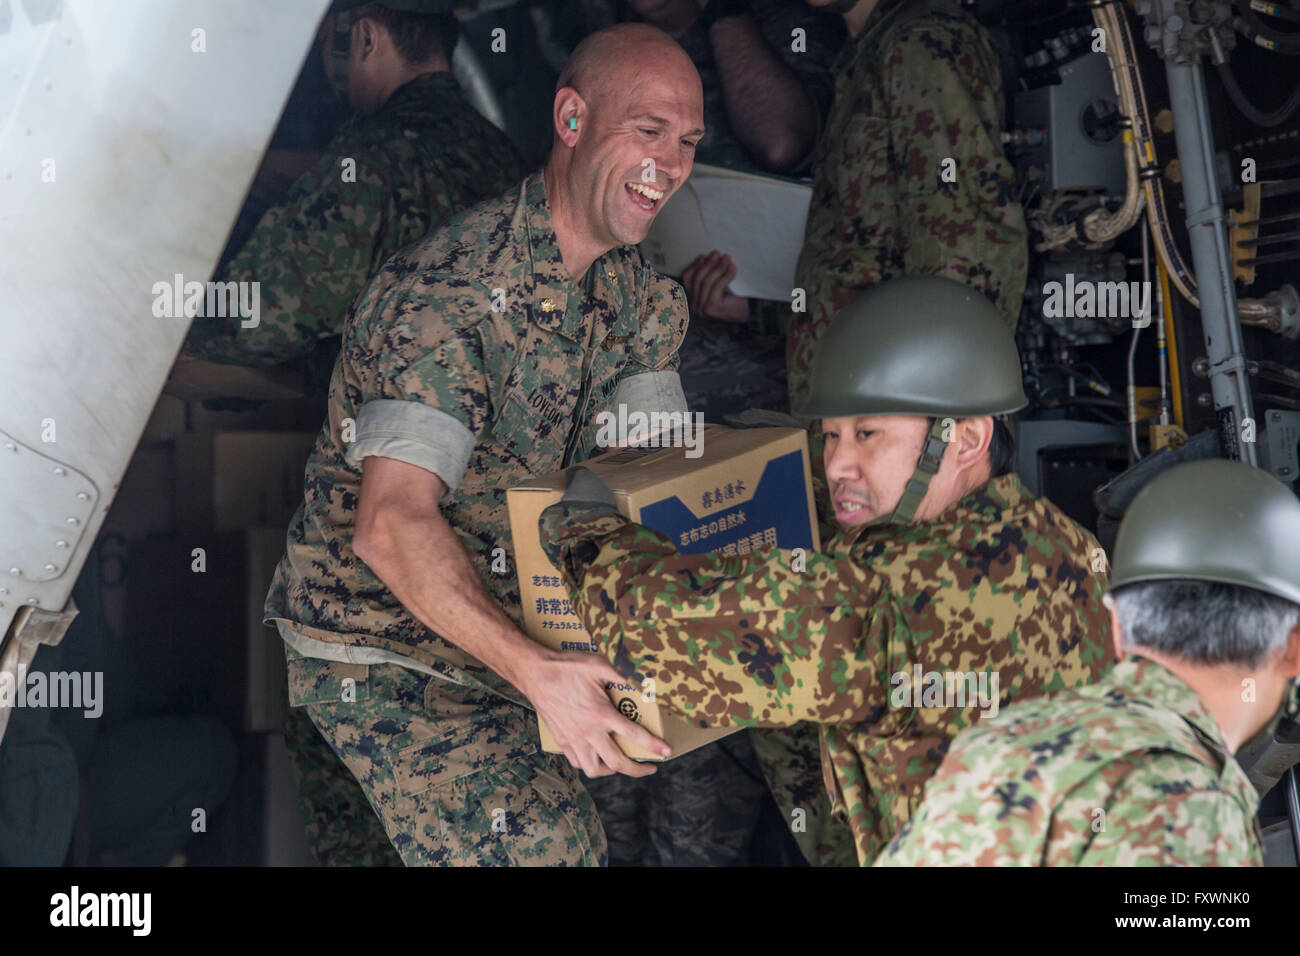 U.S Marines assist Japanese Self-Defense soldiers with unloading humanitarian aid for those affected by recent earthquakes in Kumamoto April 18, 2016 Takayubaru, Japan. The U.S joined thousands of Japanese troops to help victims of two massive earthquakes that struck the Kyushu region. Stock Photo